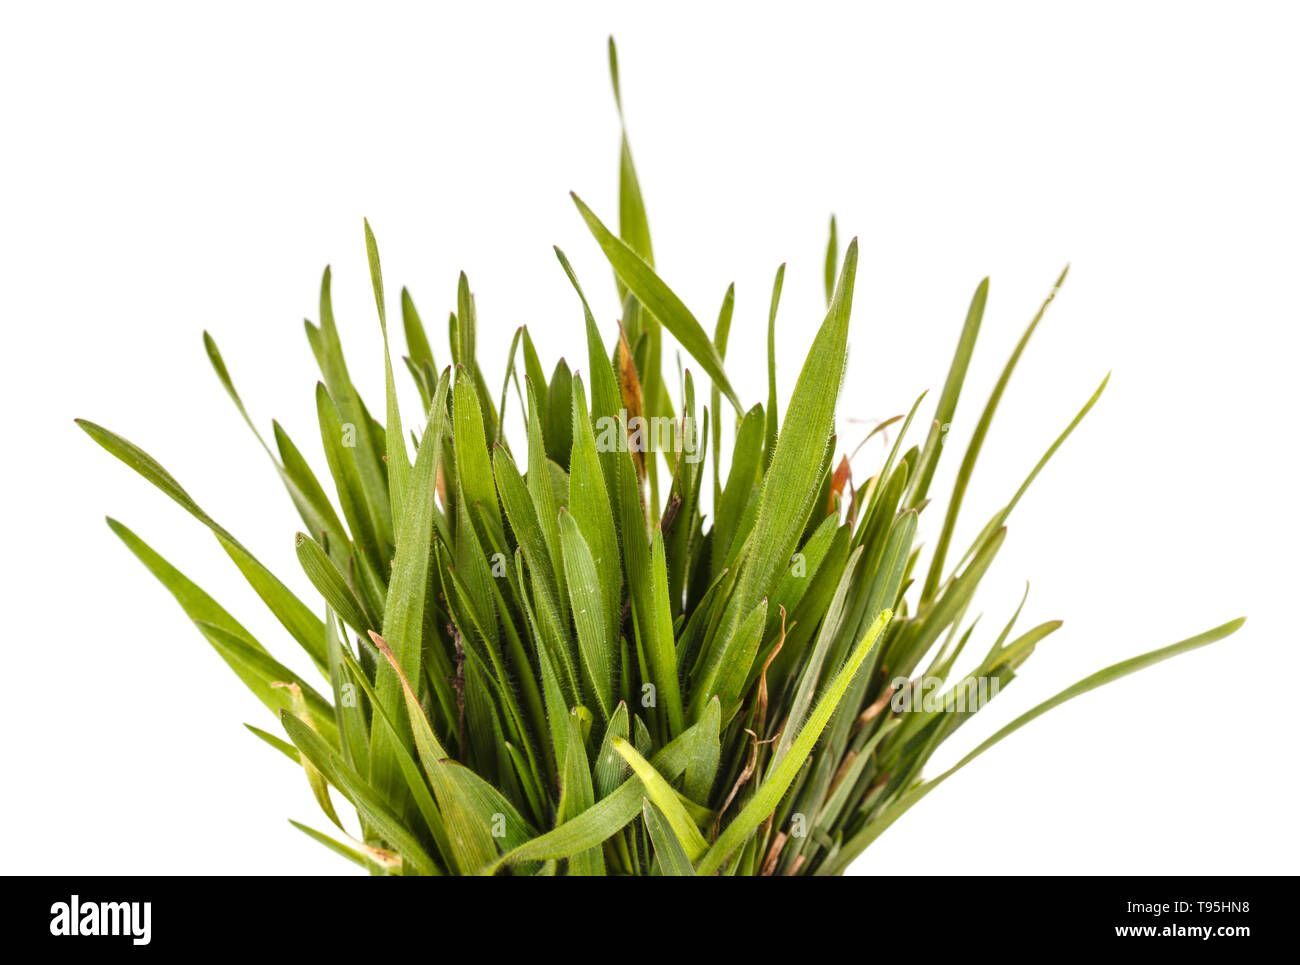 Green grass lawn isolated on white Stock Photo